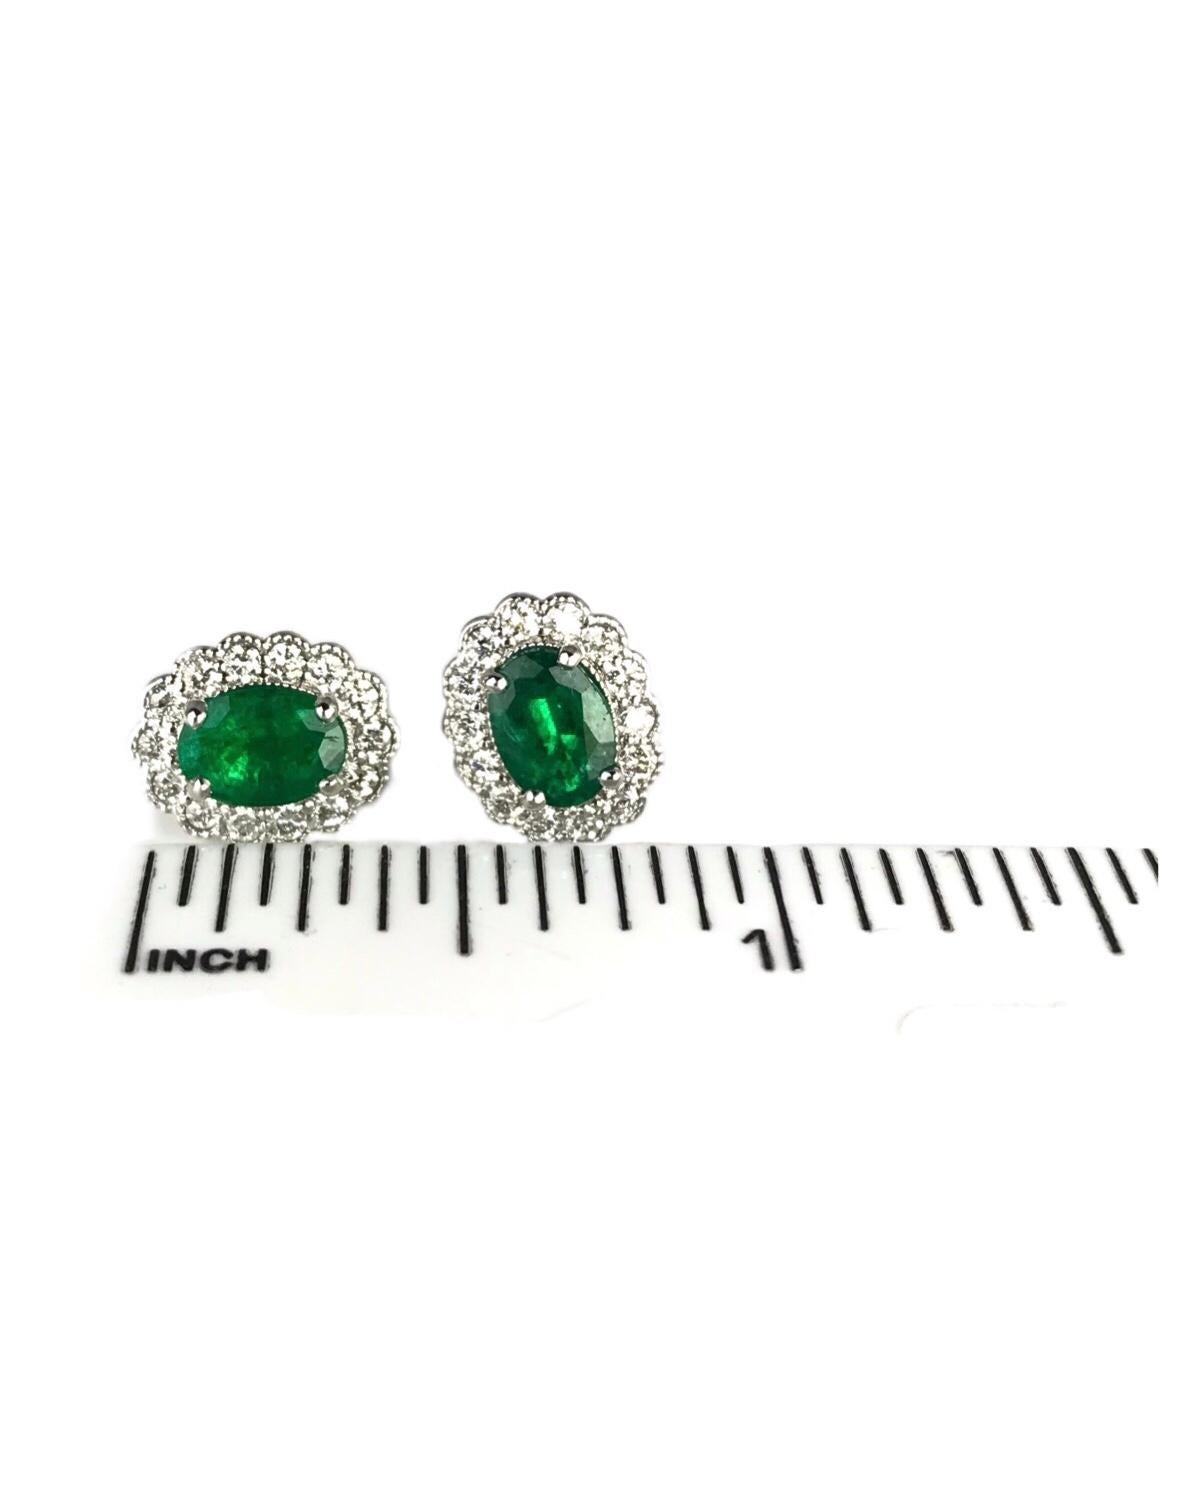 Contemporary 1.58 Carat Oval Emerald and 0.5 Ct Nat Diamond Milgrain Flower Earrings ref1555 For Sale